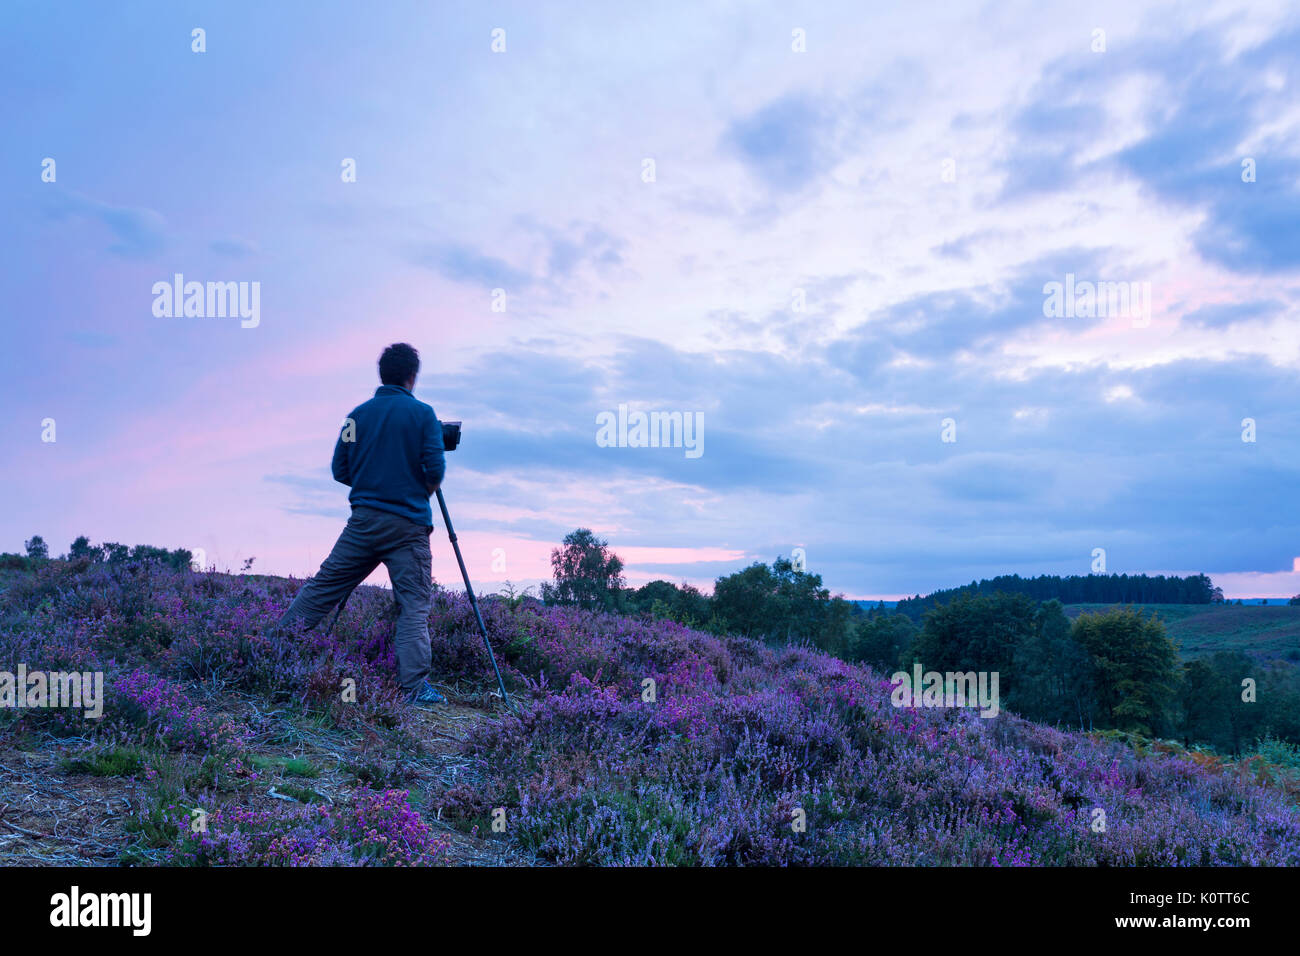 Rockford Common, New Forest, Hampshire UK. 23rd Aug, 2017. Stunning sunset over the common and heather in the New Forest. Photographer taking a photo of the sunset. Credit: Carolyn Jenkins/Alamy Live News Stock Photo